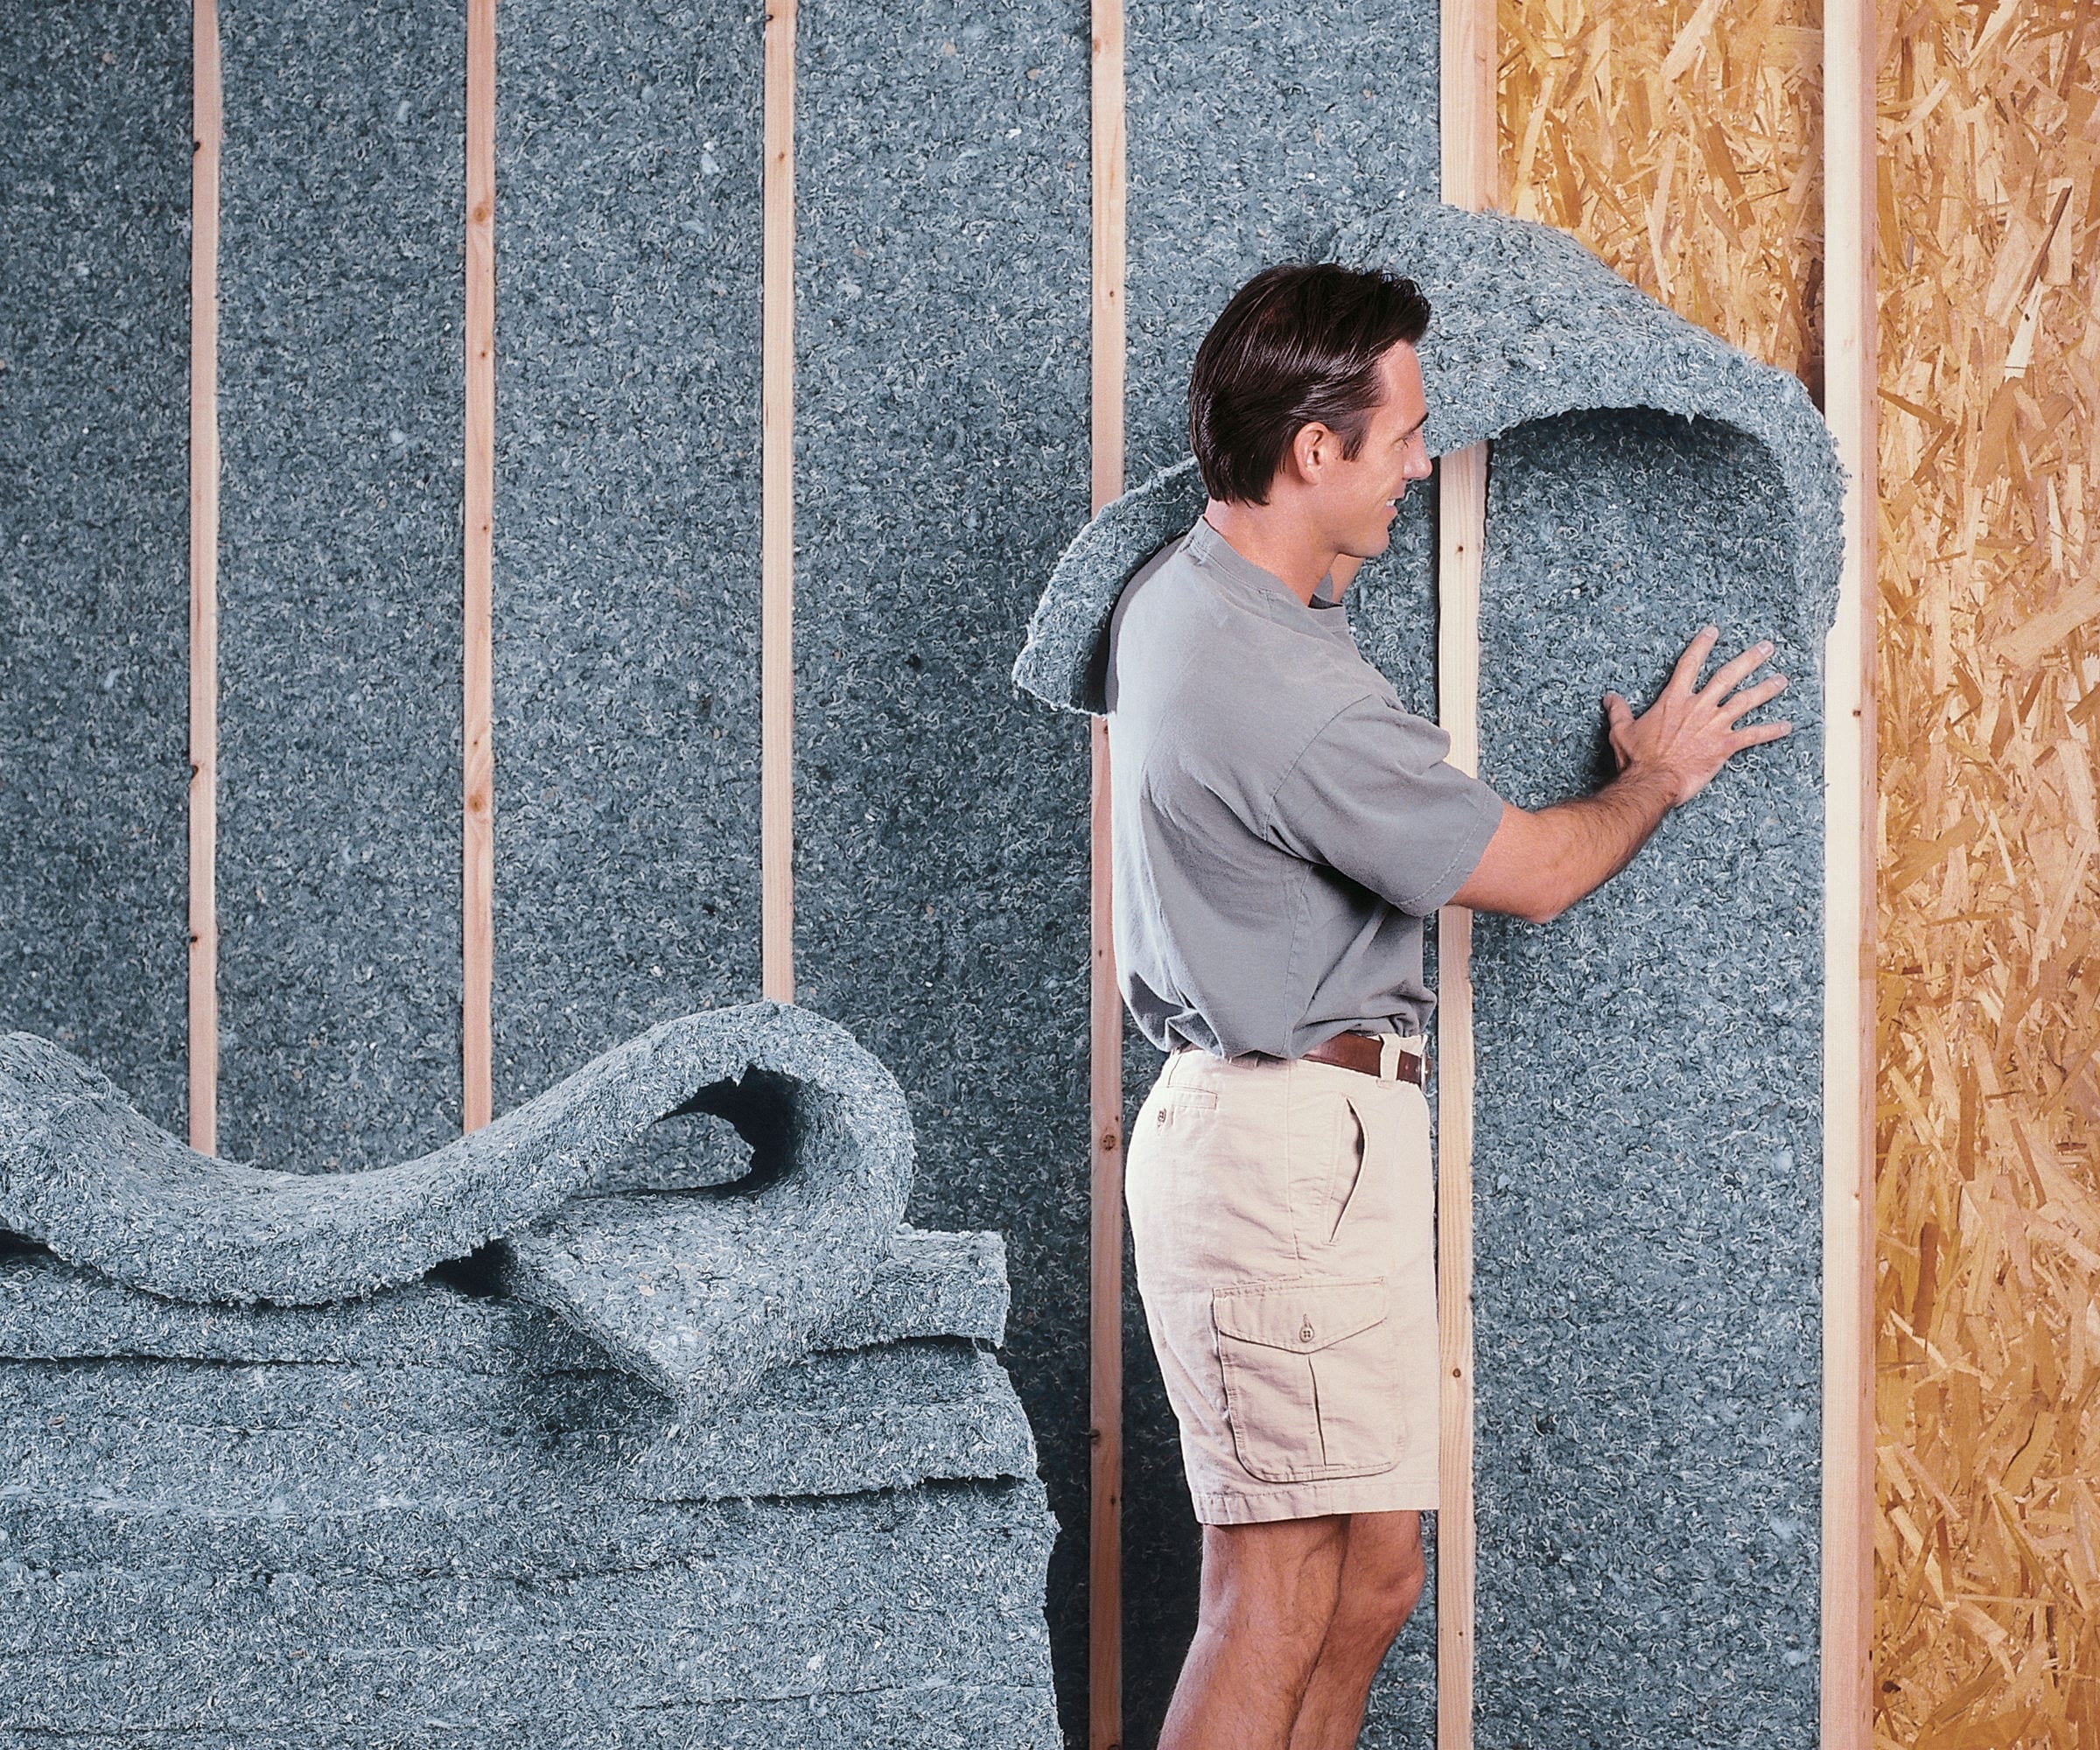 Details more than 85 denim insulation lowes latest